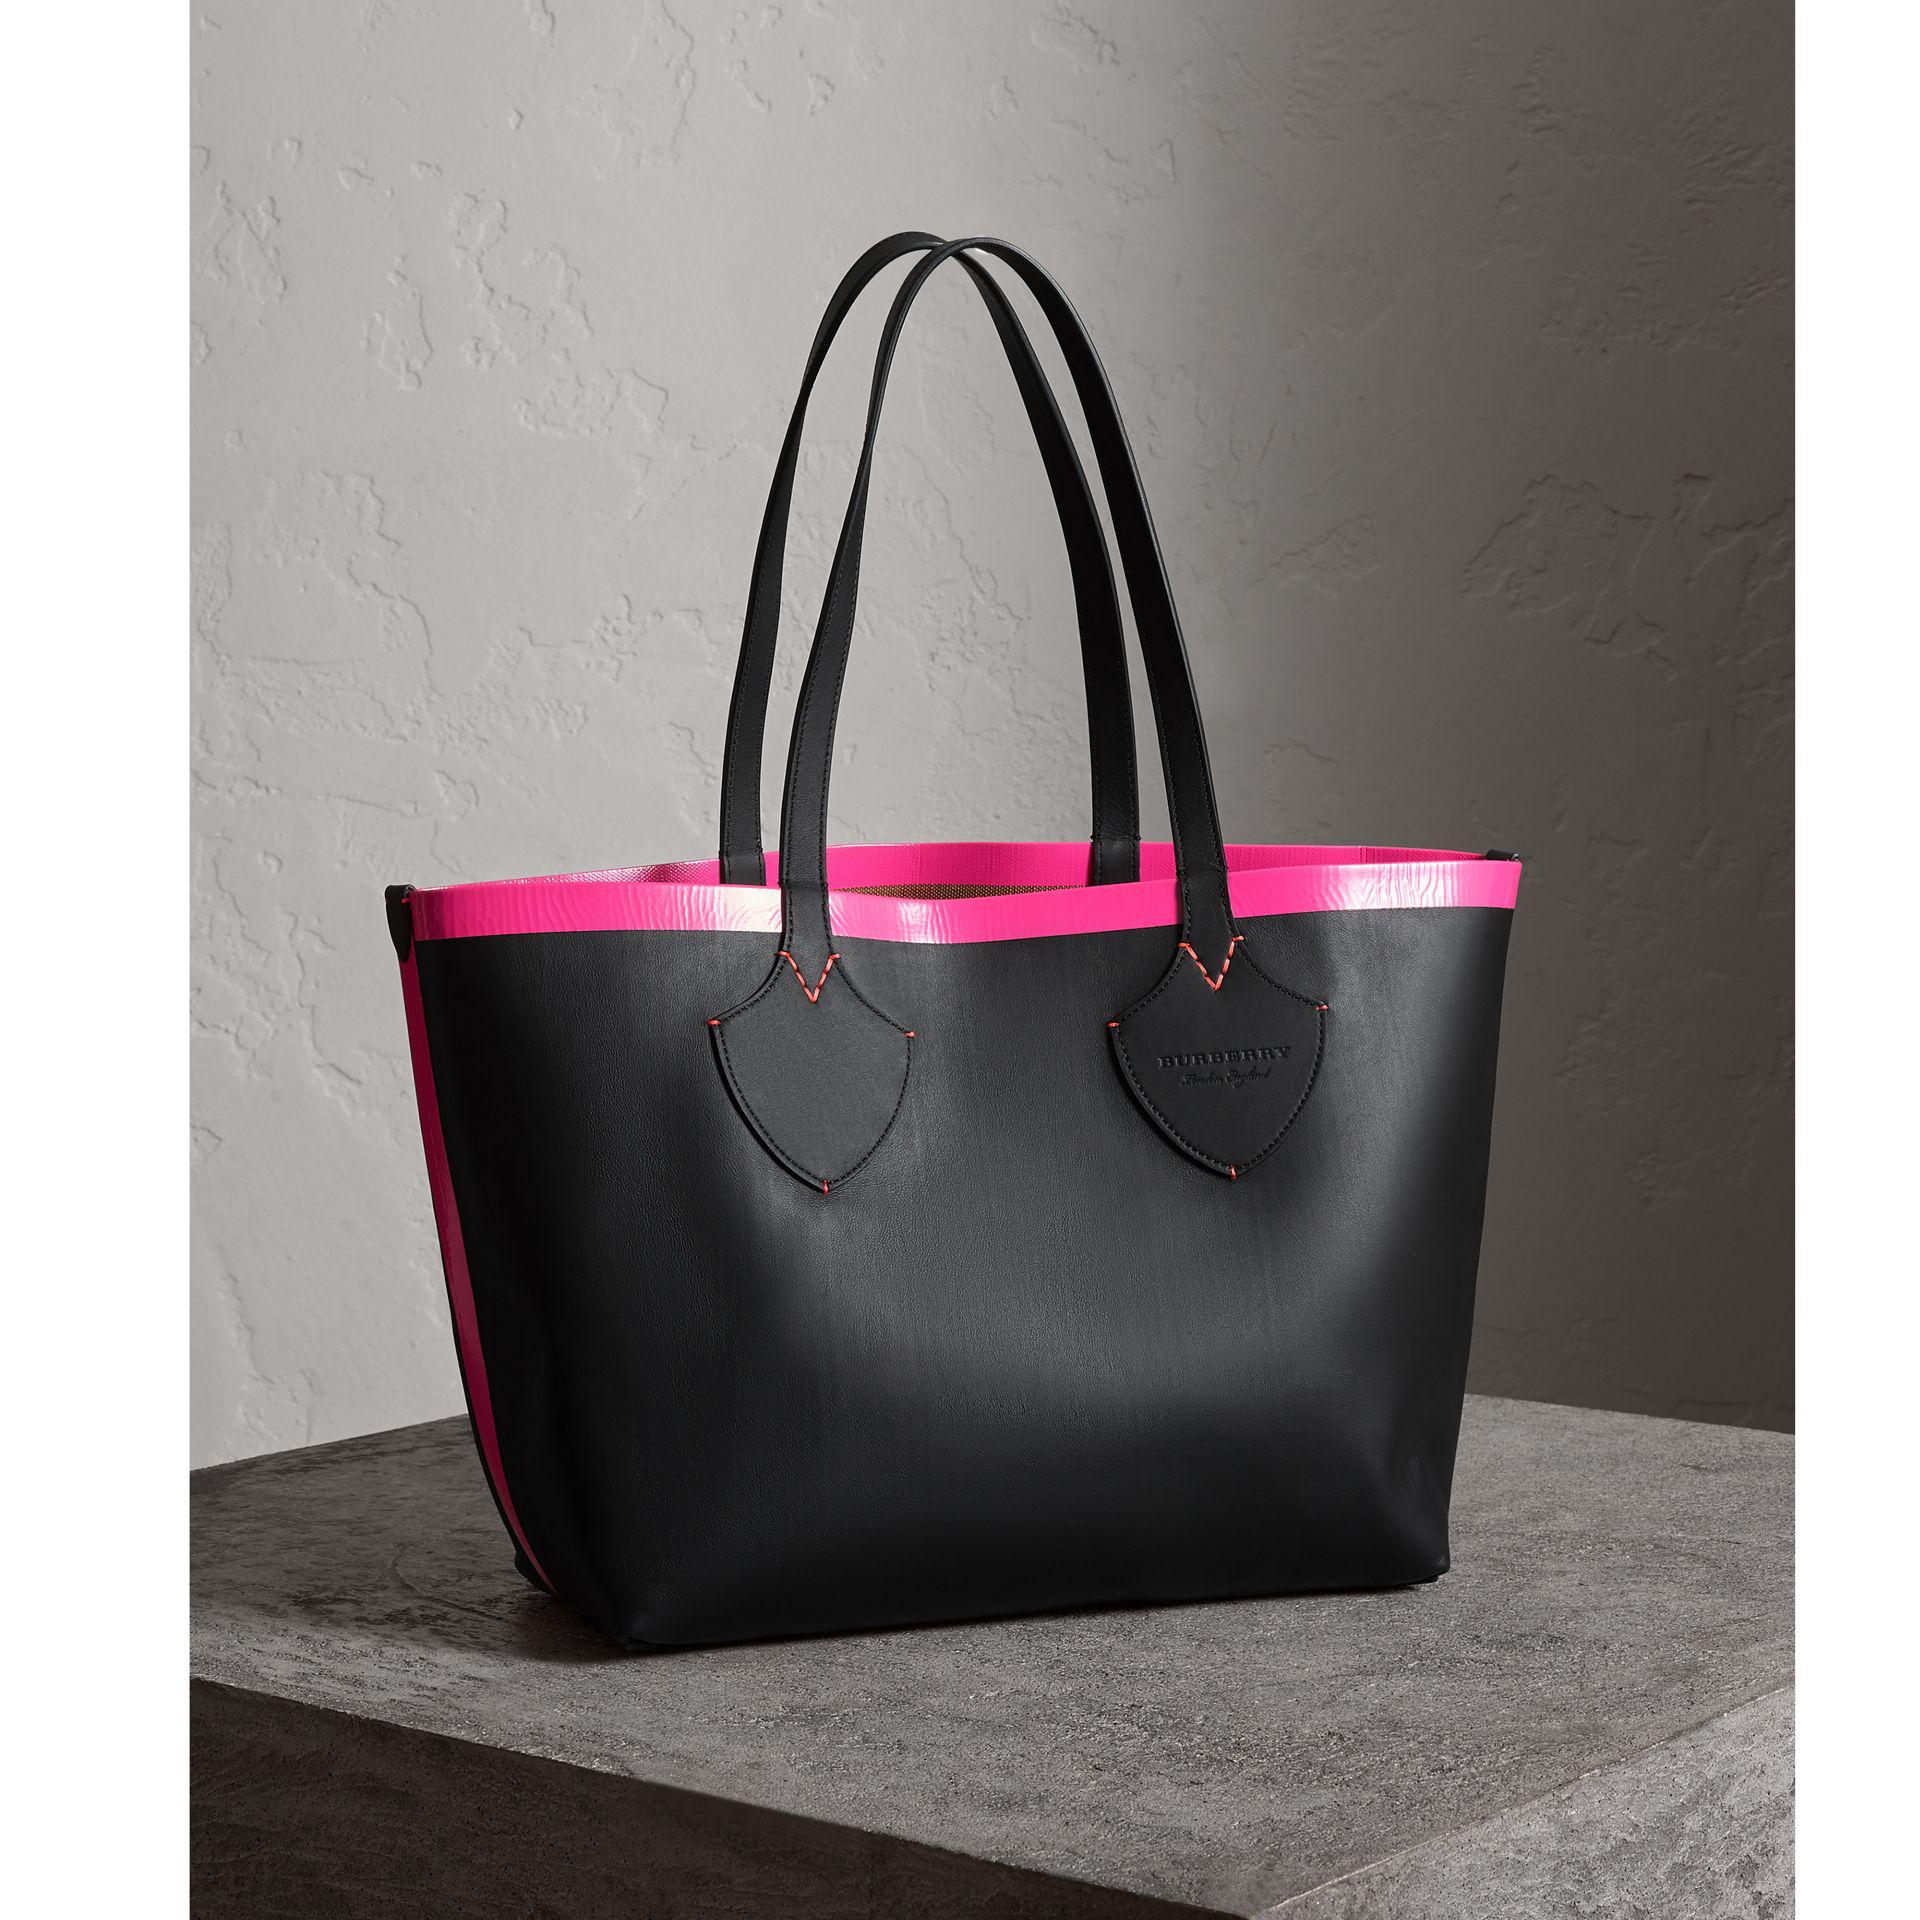 Burberry Black/Neon Pink Canvas And Leather XL Reversible Tote